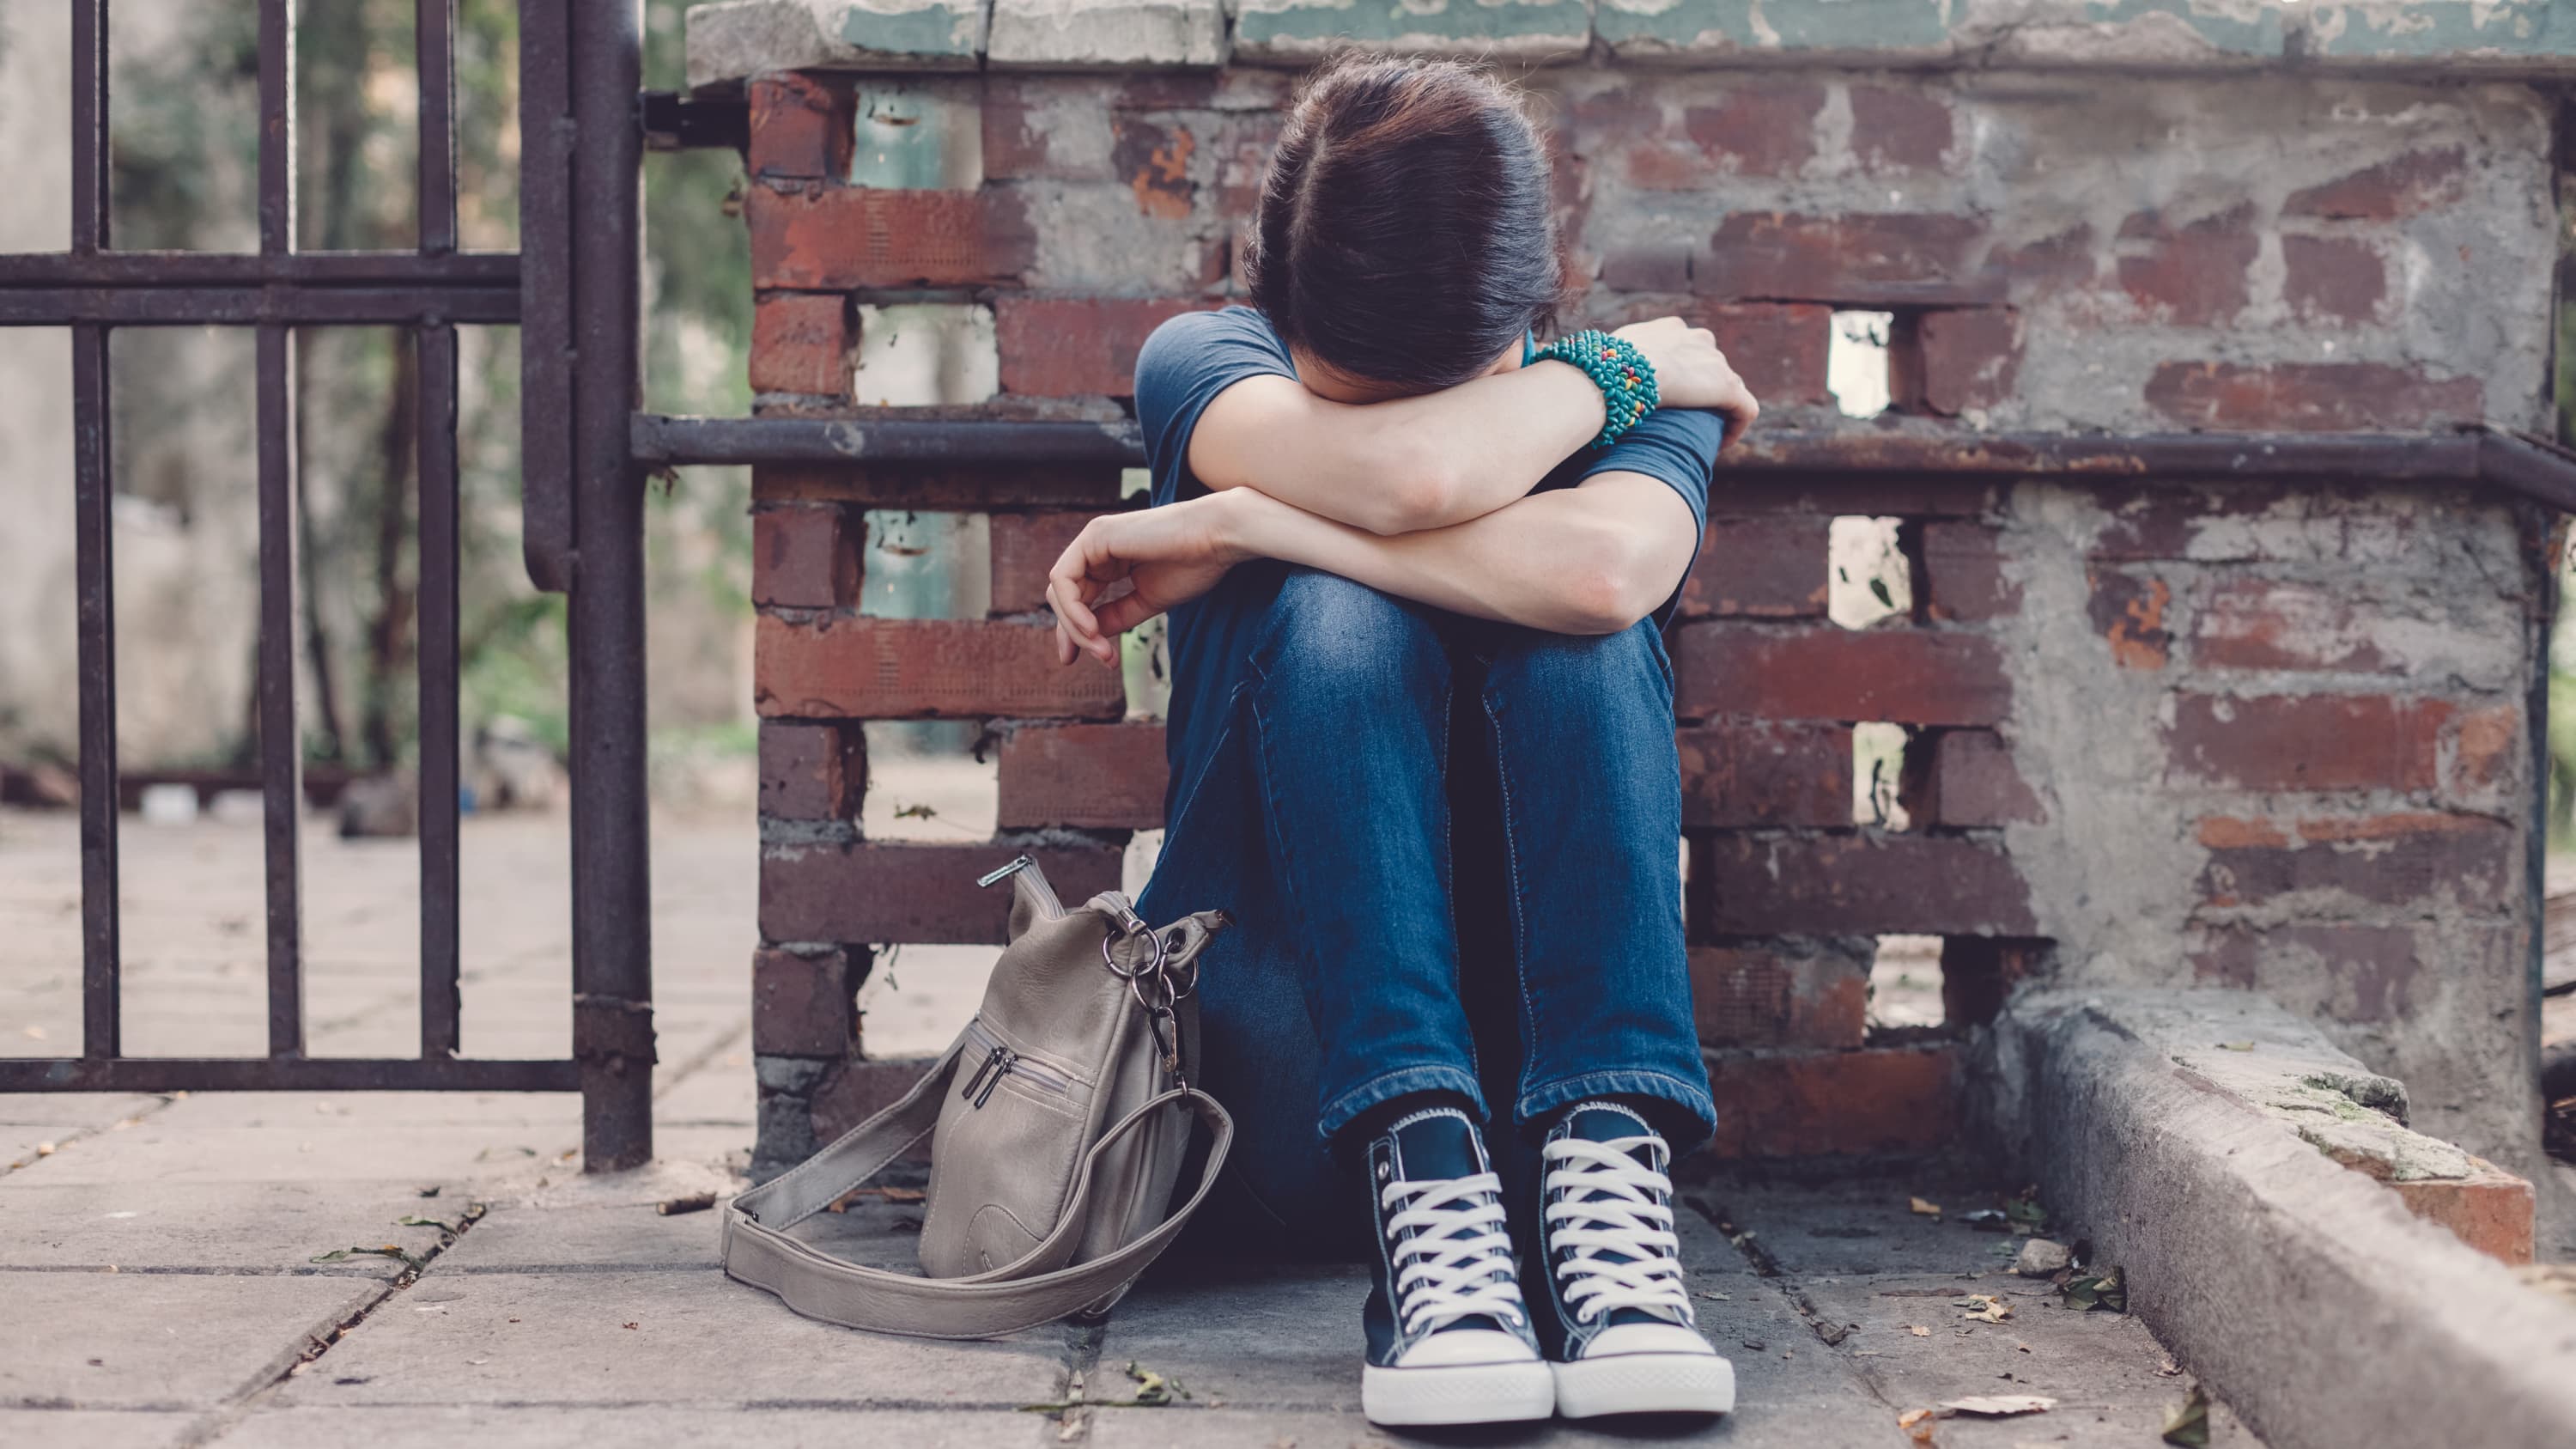 A boy who looks like he is feeling depressed sits on the ground beside his backpack with his head in his hands.